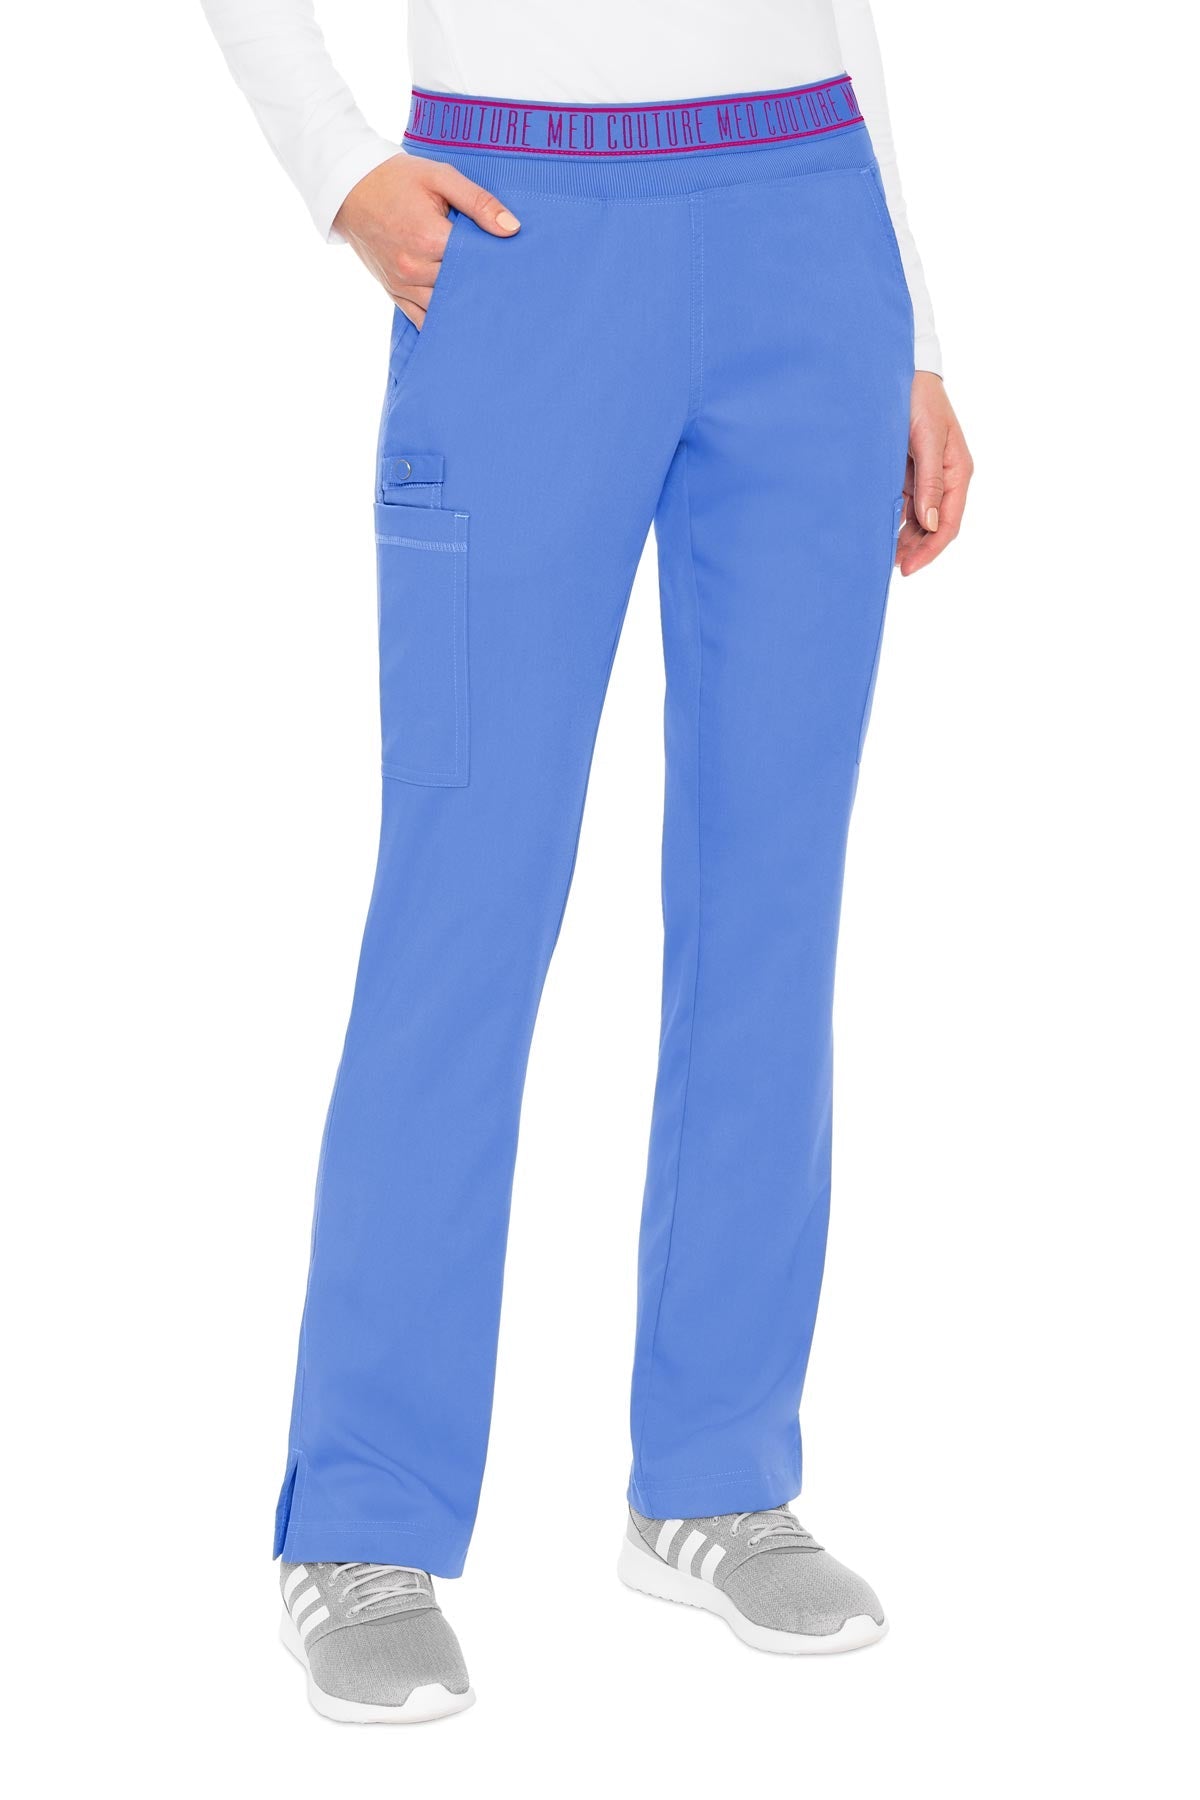 Med Couture Ceil PANT